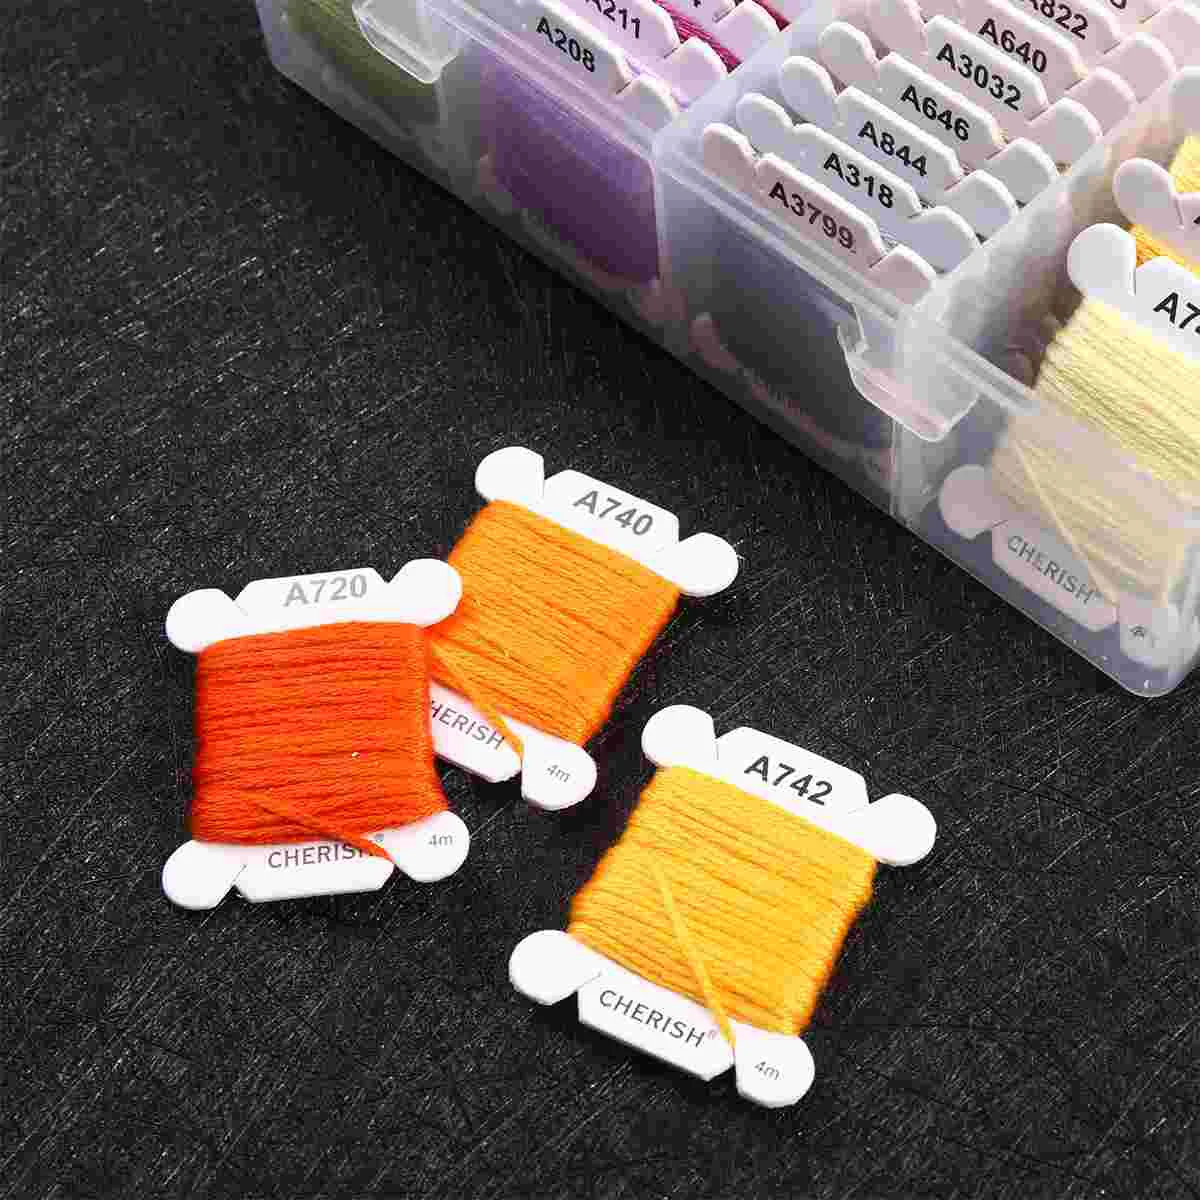 

Weaving Threads Multi Colored Yarn Cotton Thread Stitching Thread Beading Cords String Bracelet Making Friendship Braclets